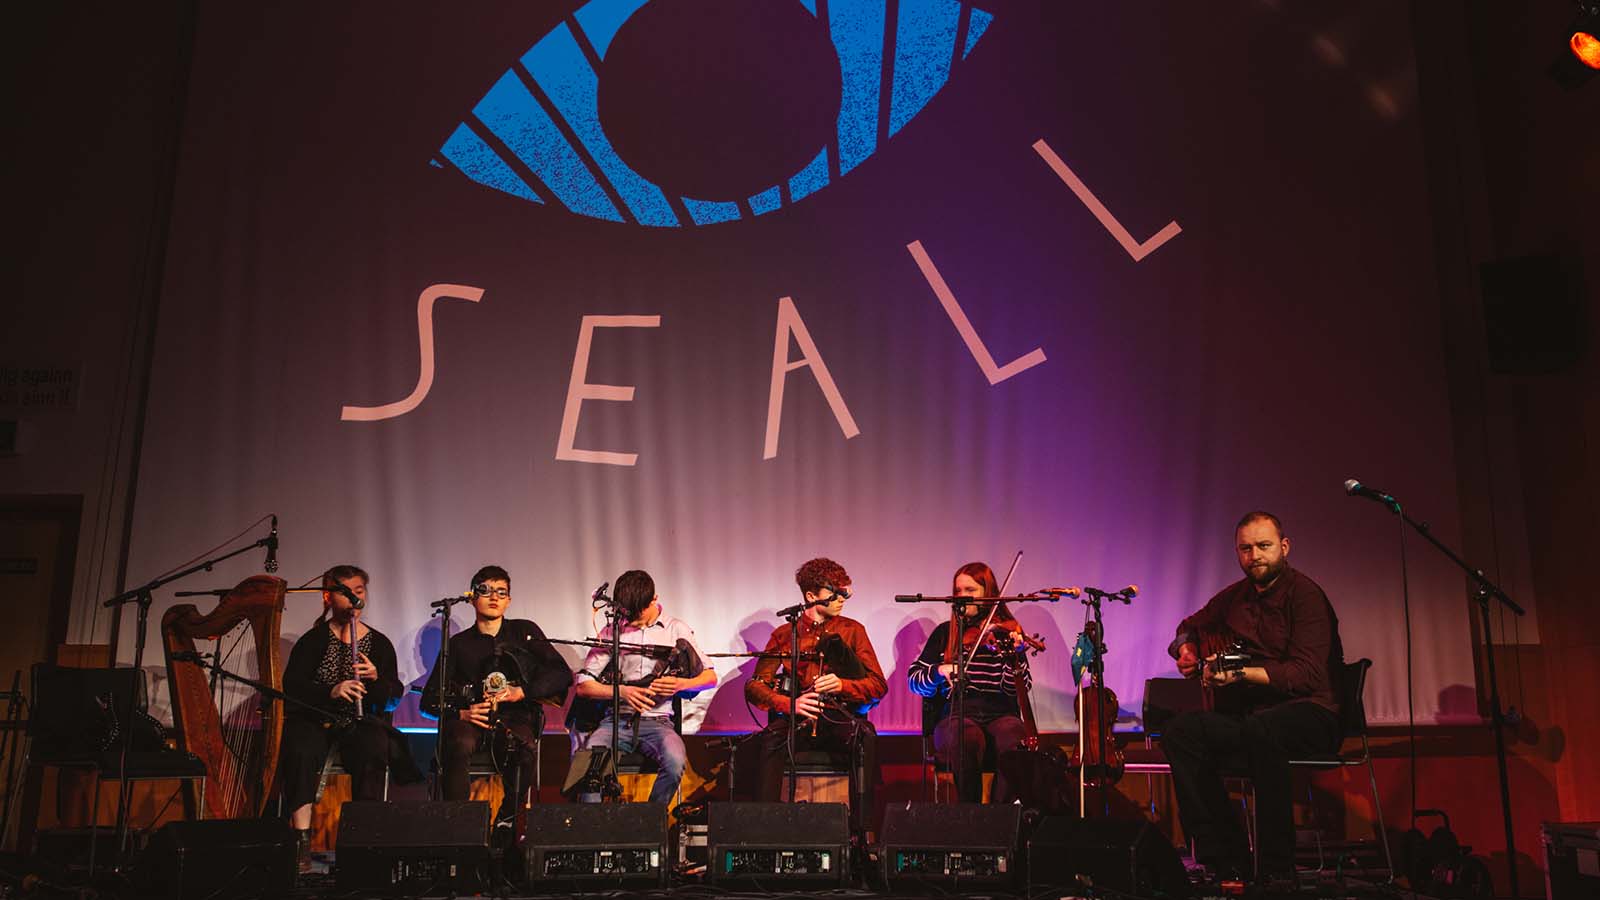 A group of young musicians seated in a row on a stage playing various instruments: a flute, pipes, fiddles - at the end of the row is a man playing the guitar. On the wall behind them a giant projection reads 'SEALL'